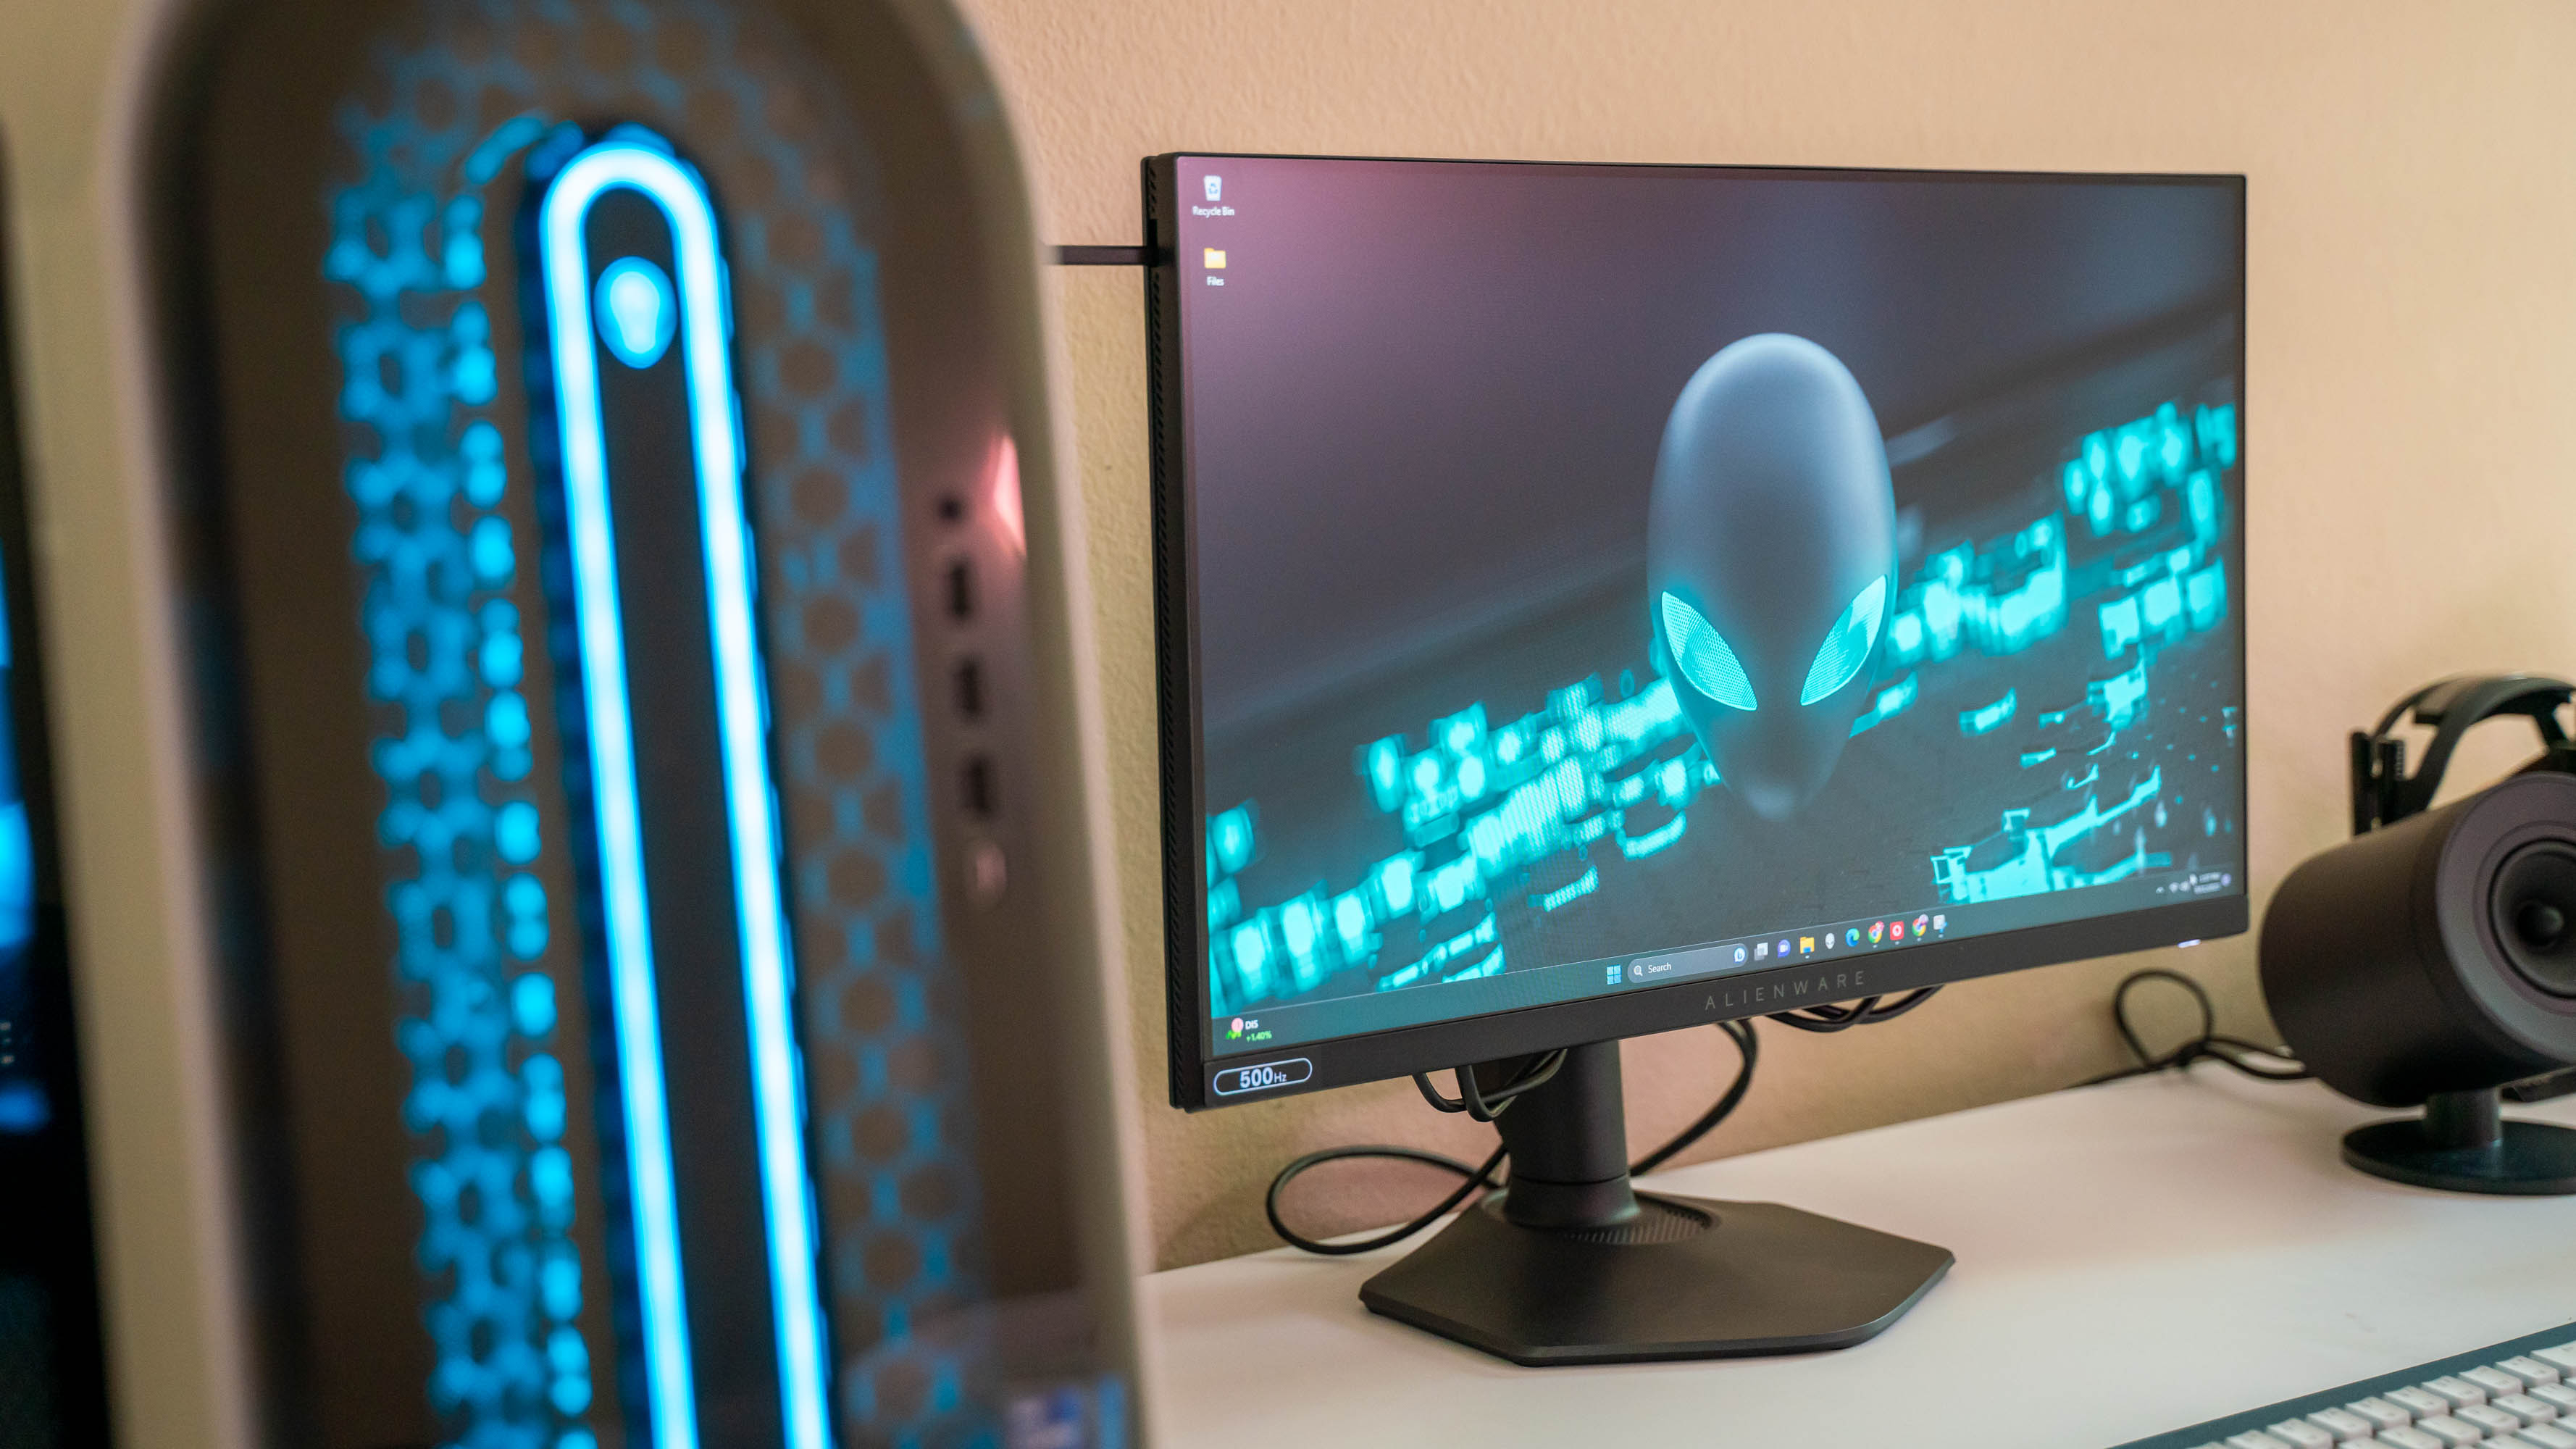 I didn't expect to see Alienware's 500Hz monitor show up cheaper